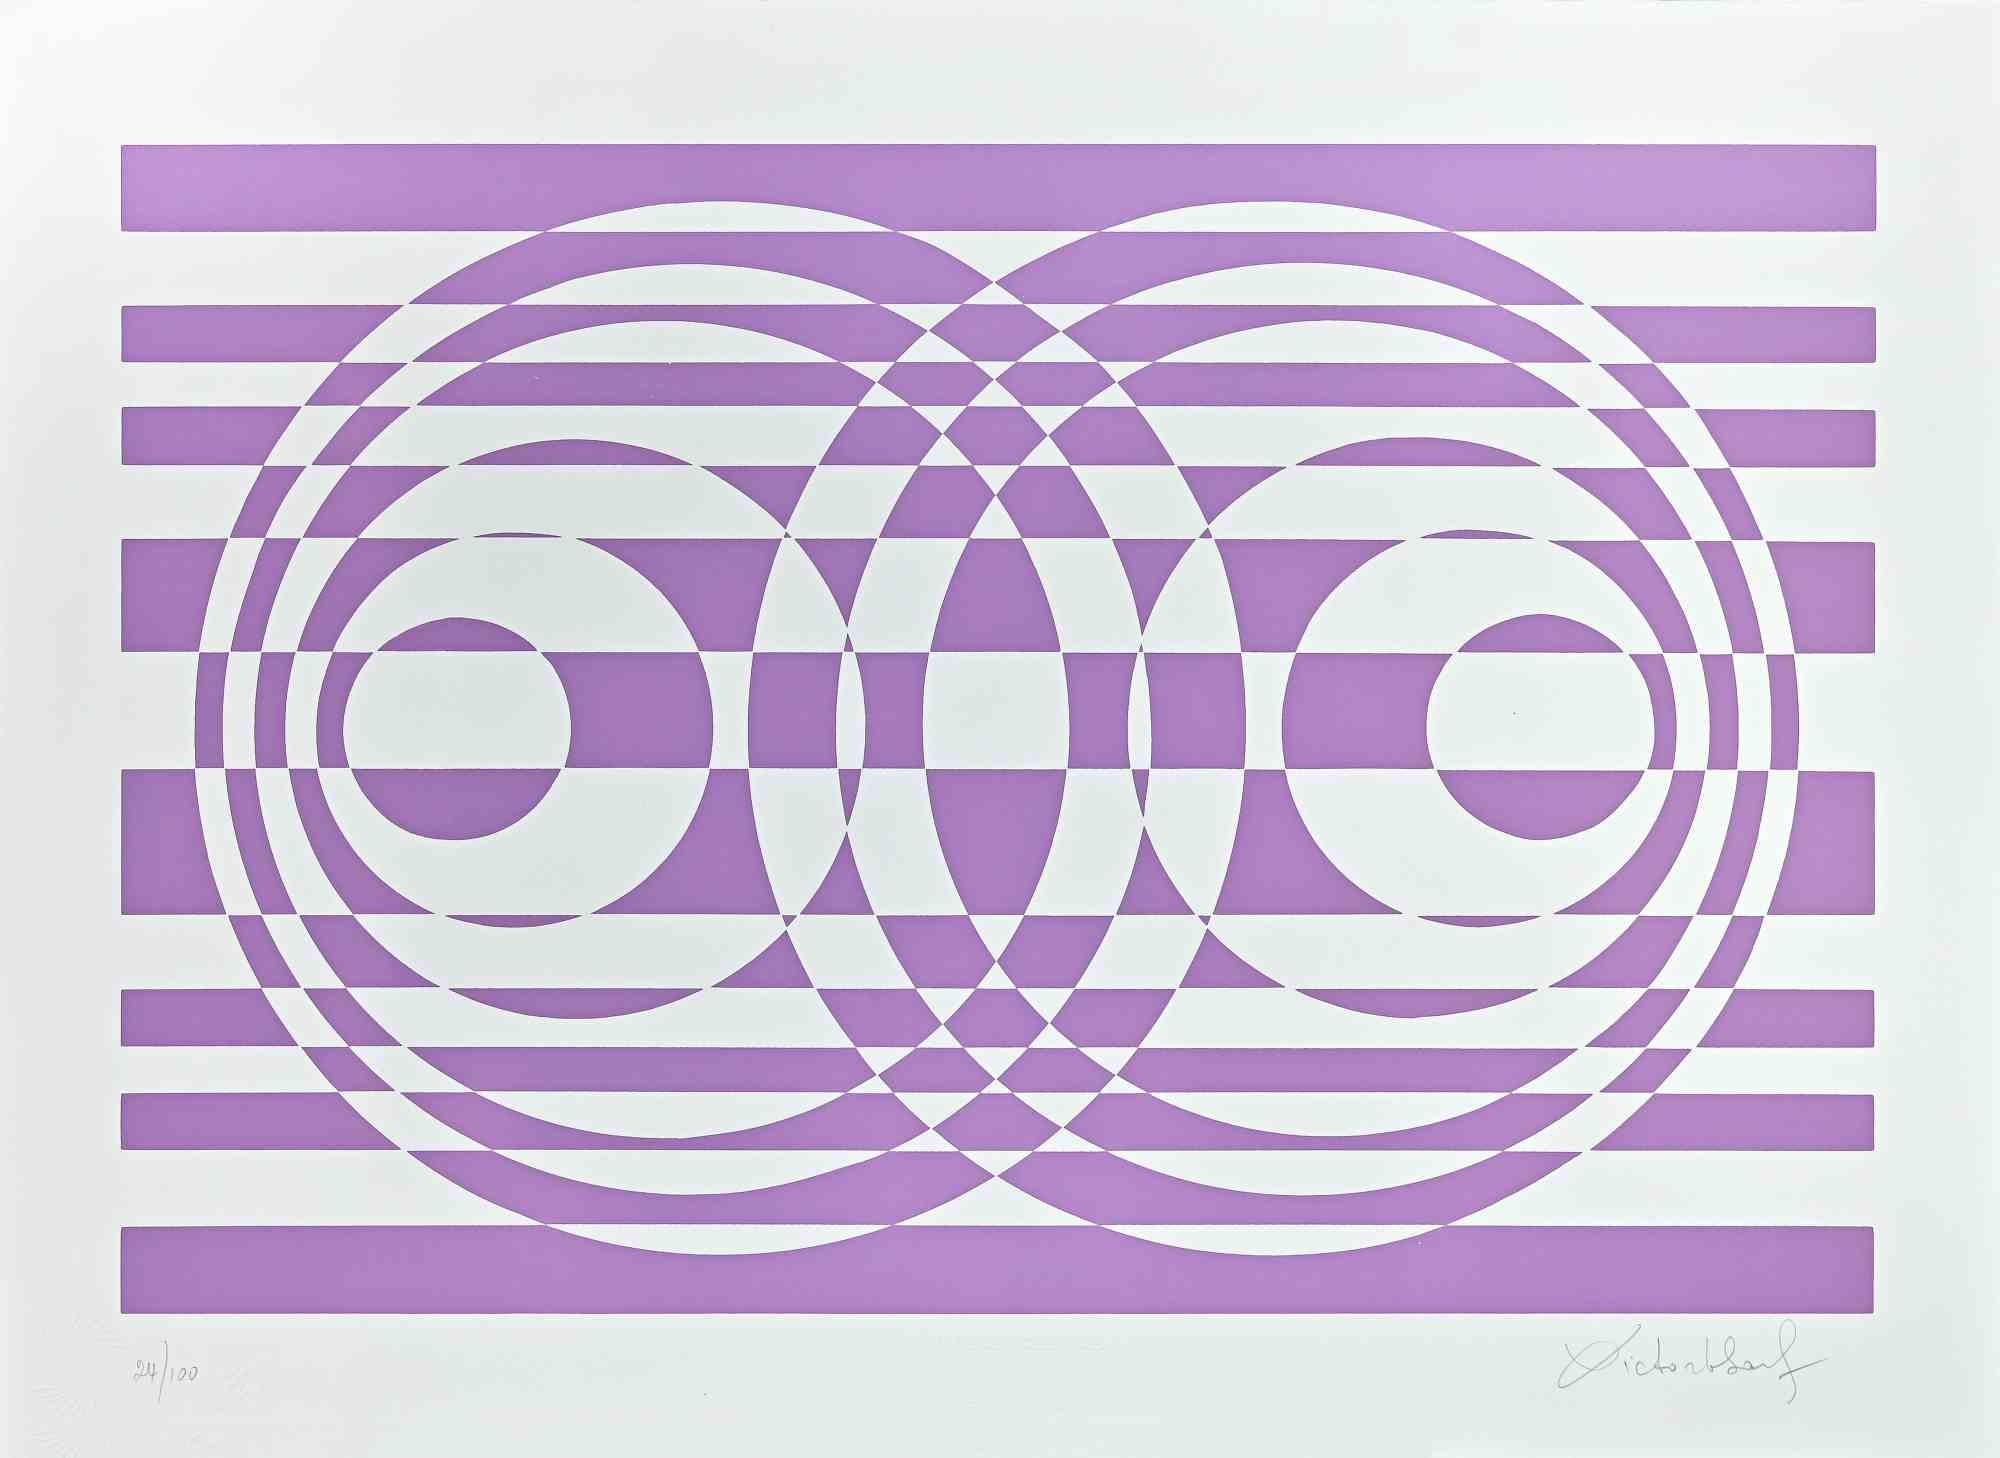 Abstract composition in purple is a screenprint realized by Victor Debach in 1970s.

50x70 cm.

Edition 24/100

Handsigned in pencil on the right lower margin.

Excellent conditions.